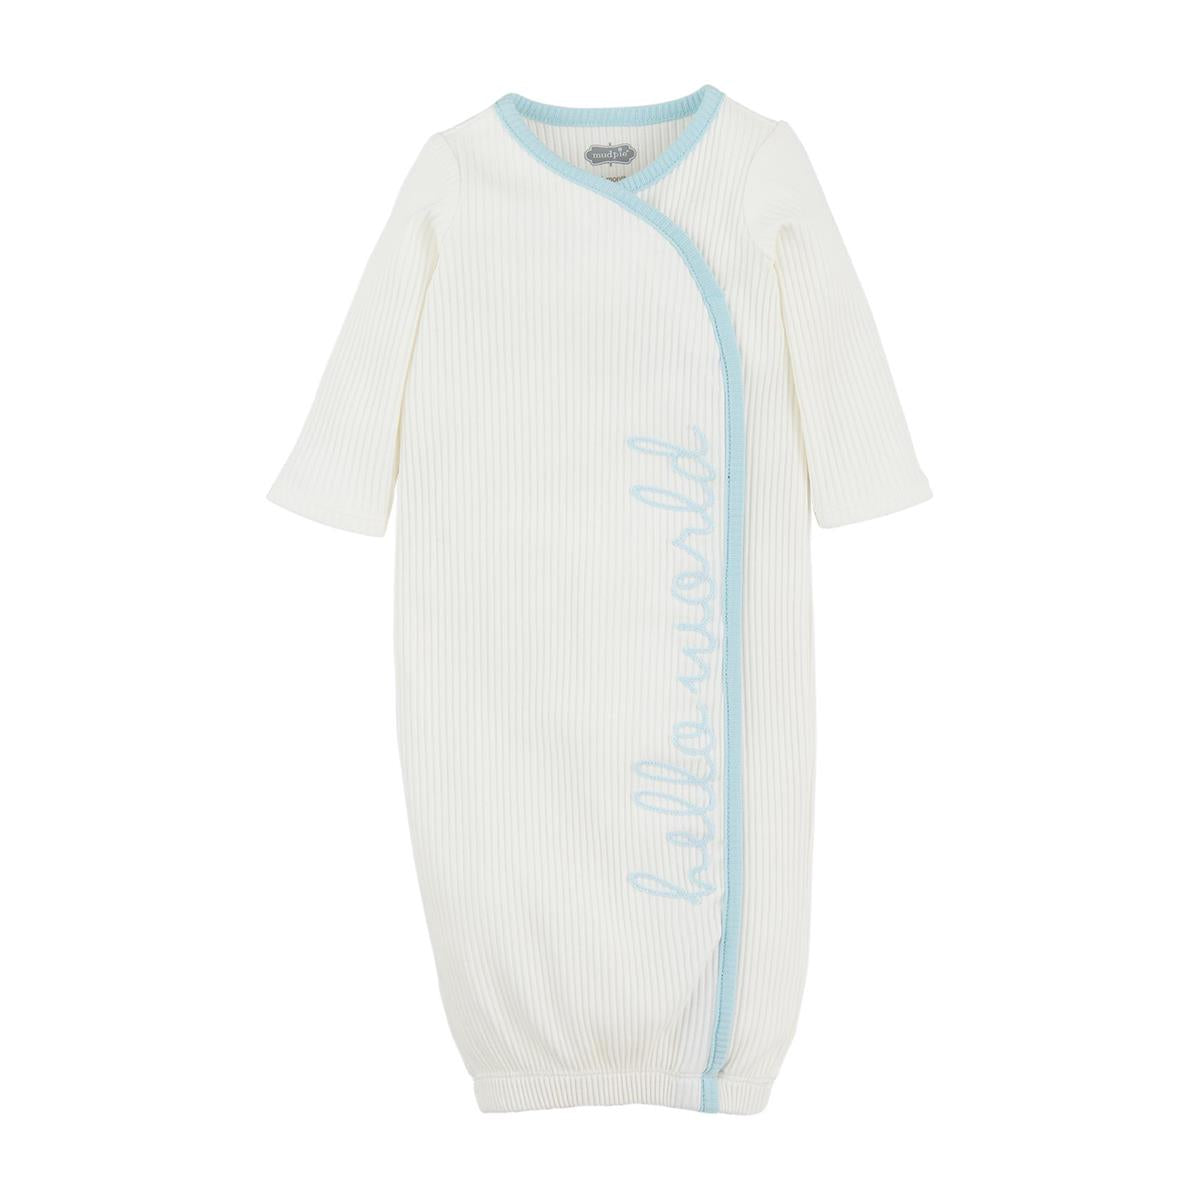 HELLO WORLD BABY GOWN - BLUE